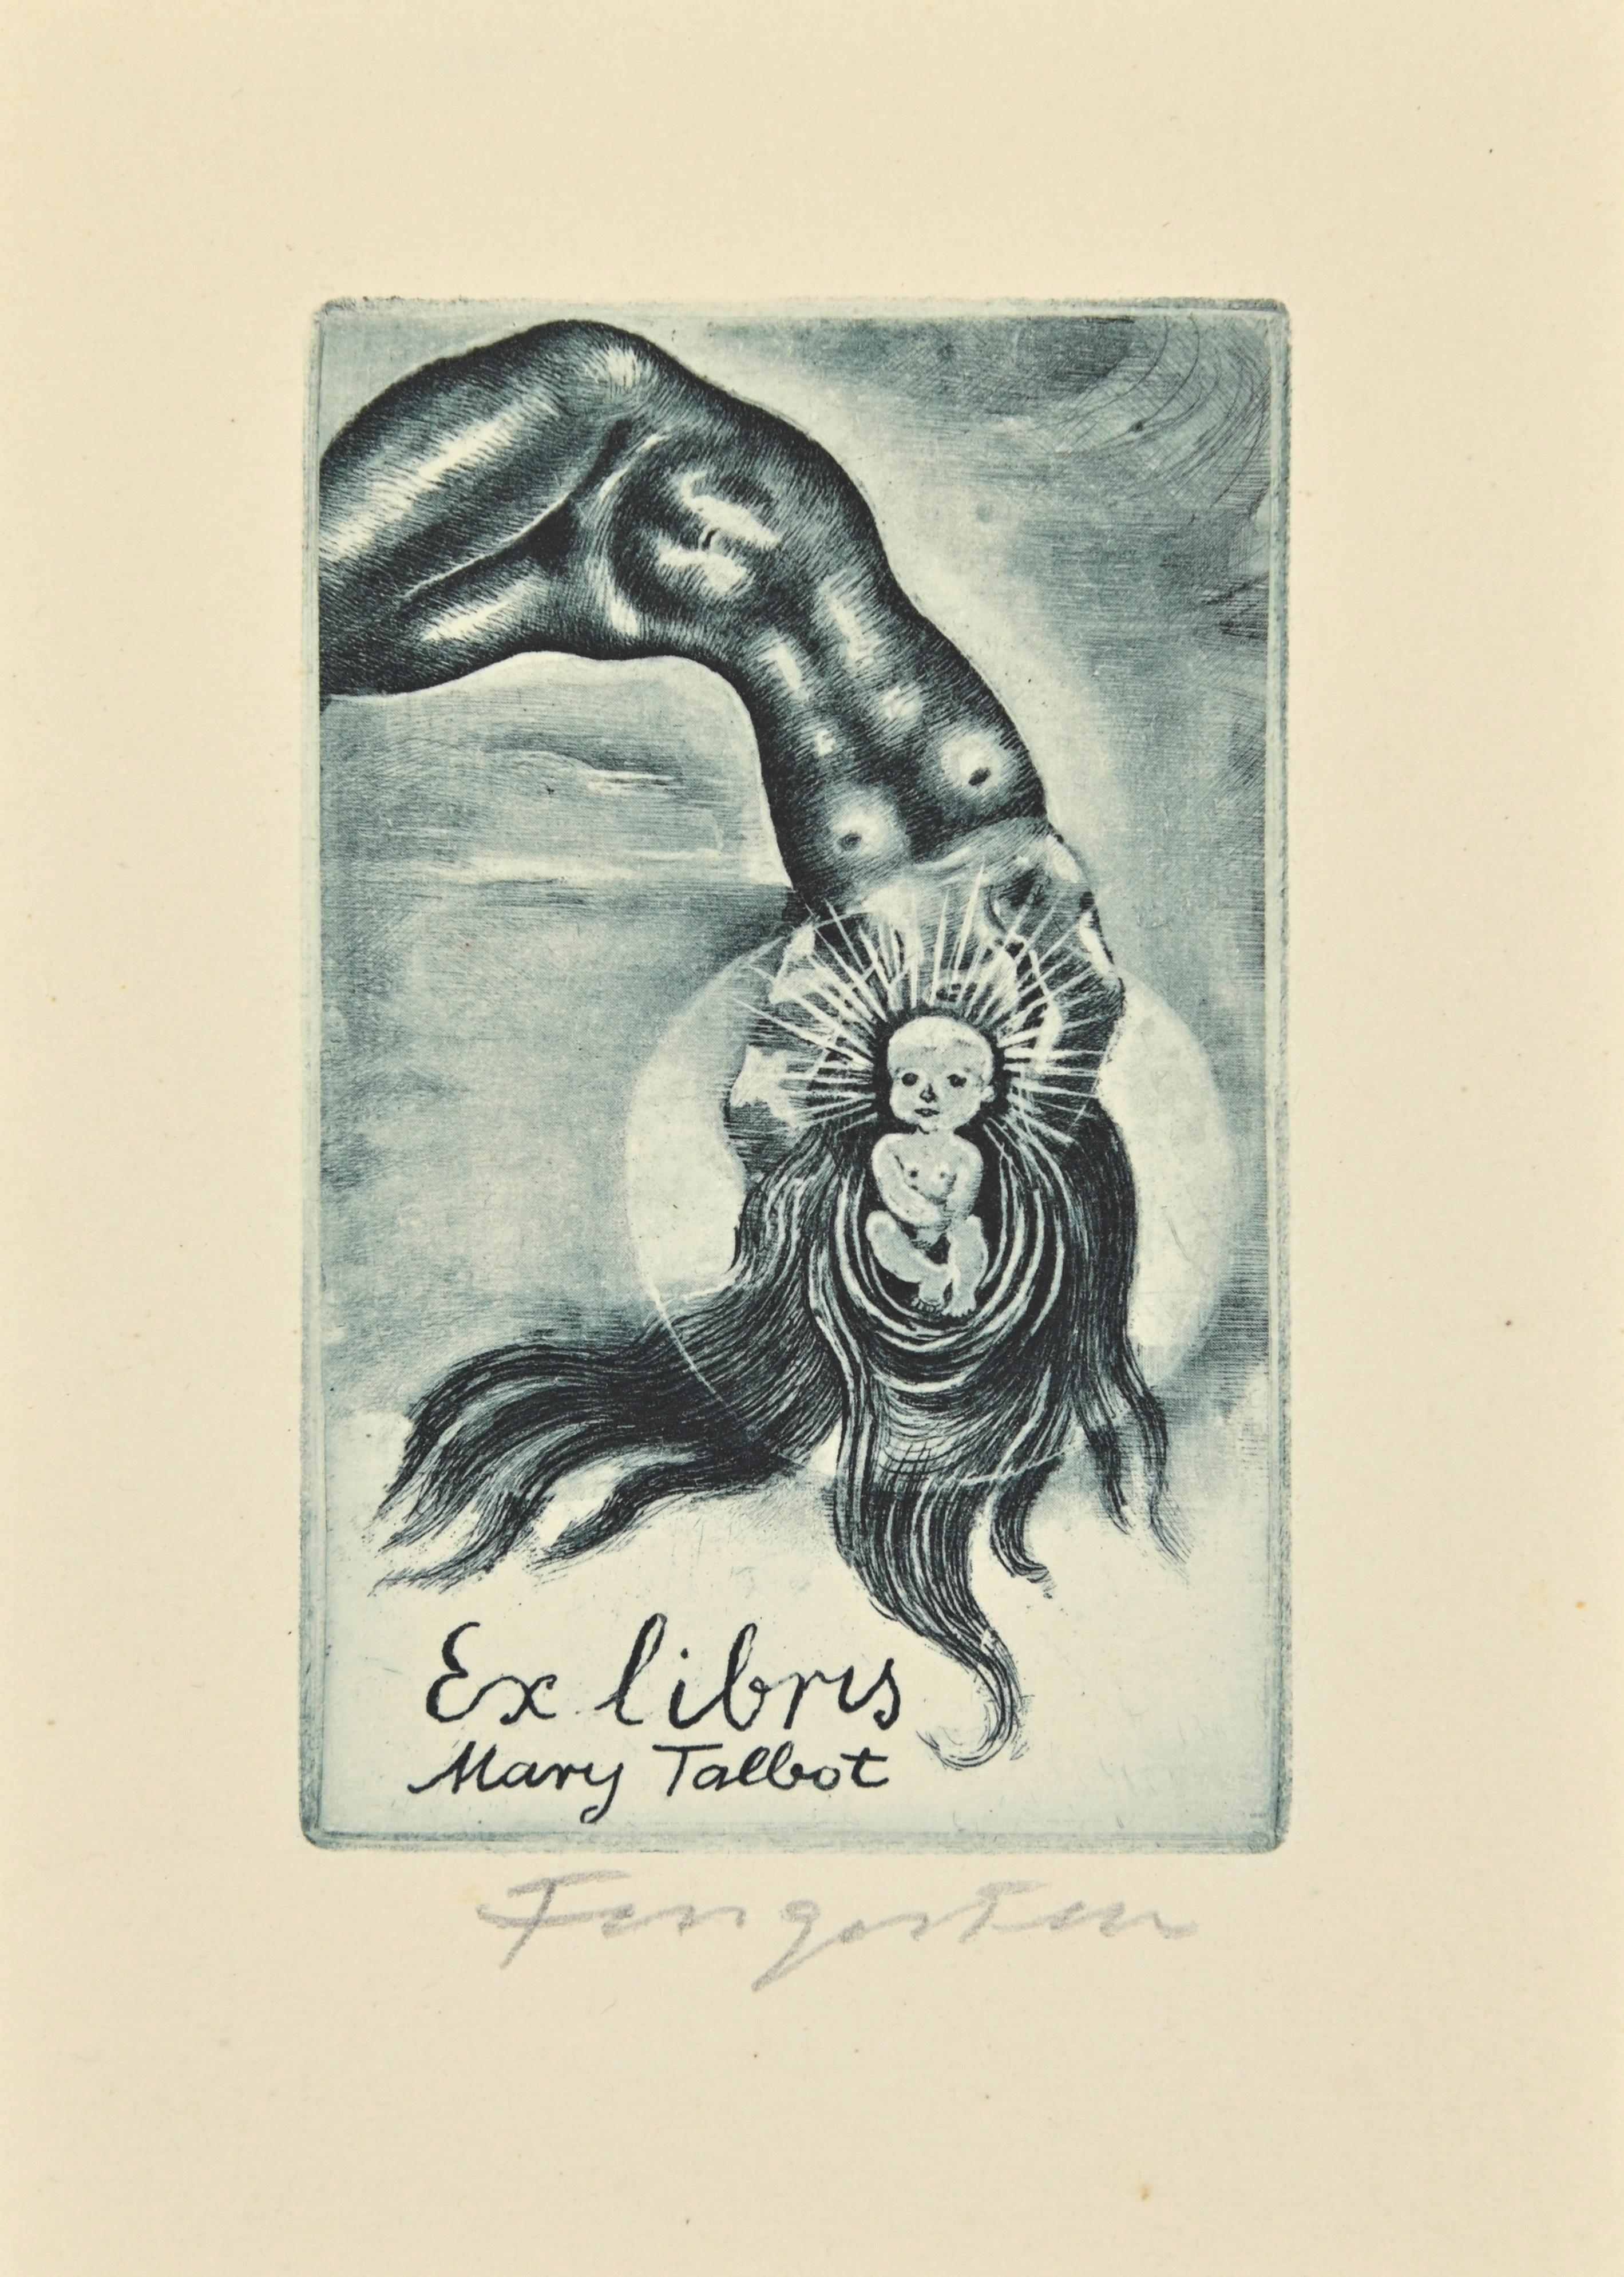 Ex Libris - Mary Talbot is an Etching print created by  Michel Fingesten.

Hand Signed on the lower right margin.

Good conditions.

Michel Fingesten (1884 - 1943) was a Czech painter and engraver of Jewish origin. He is considered one of the